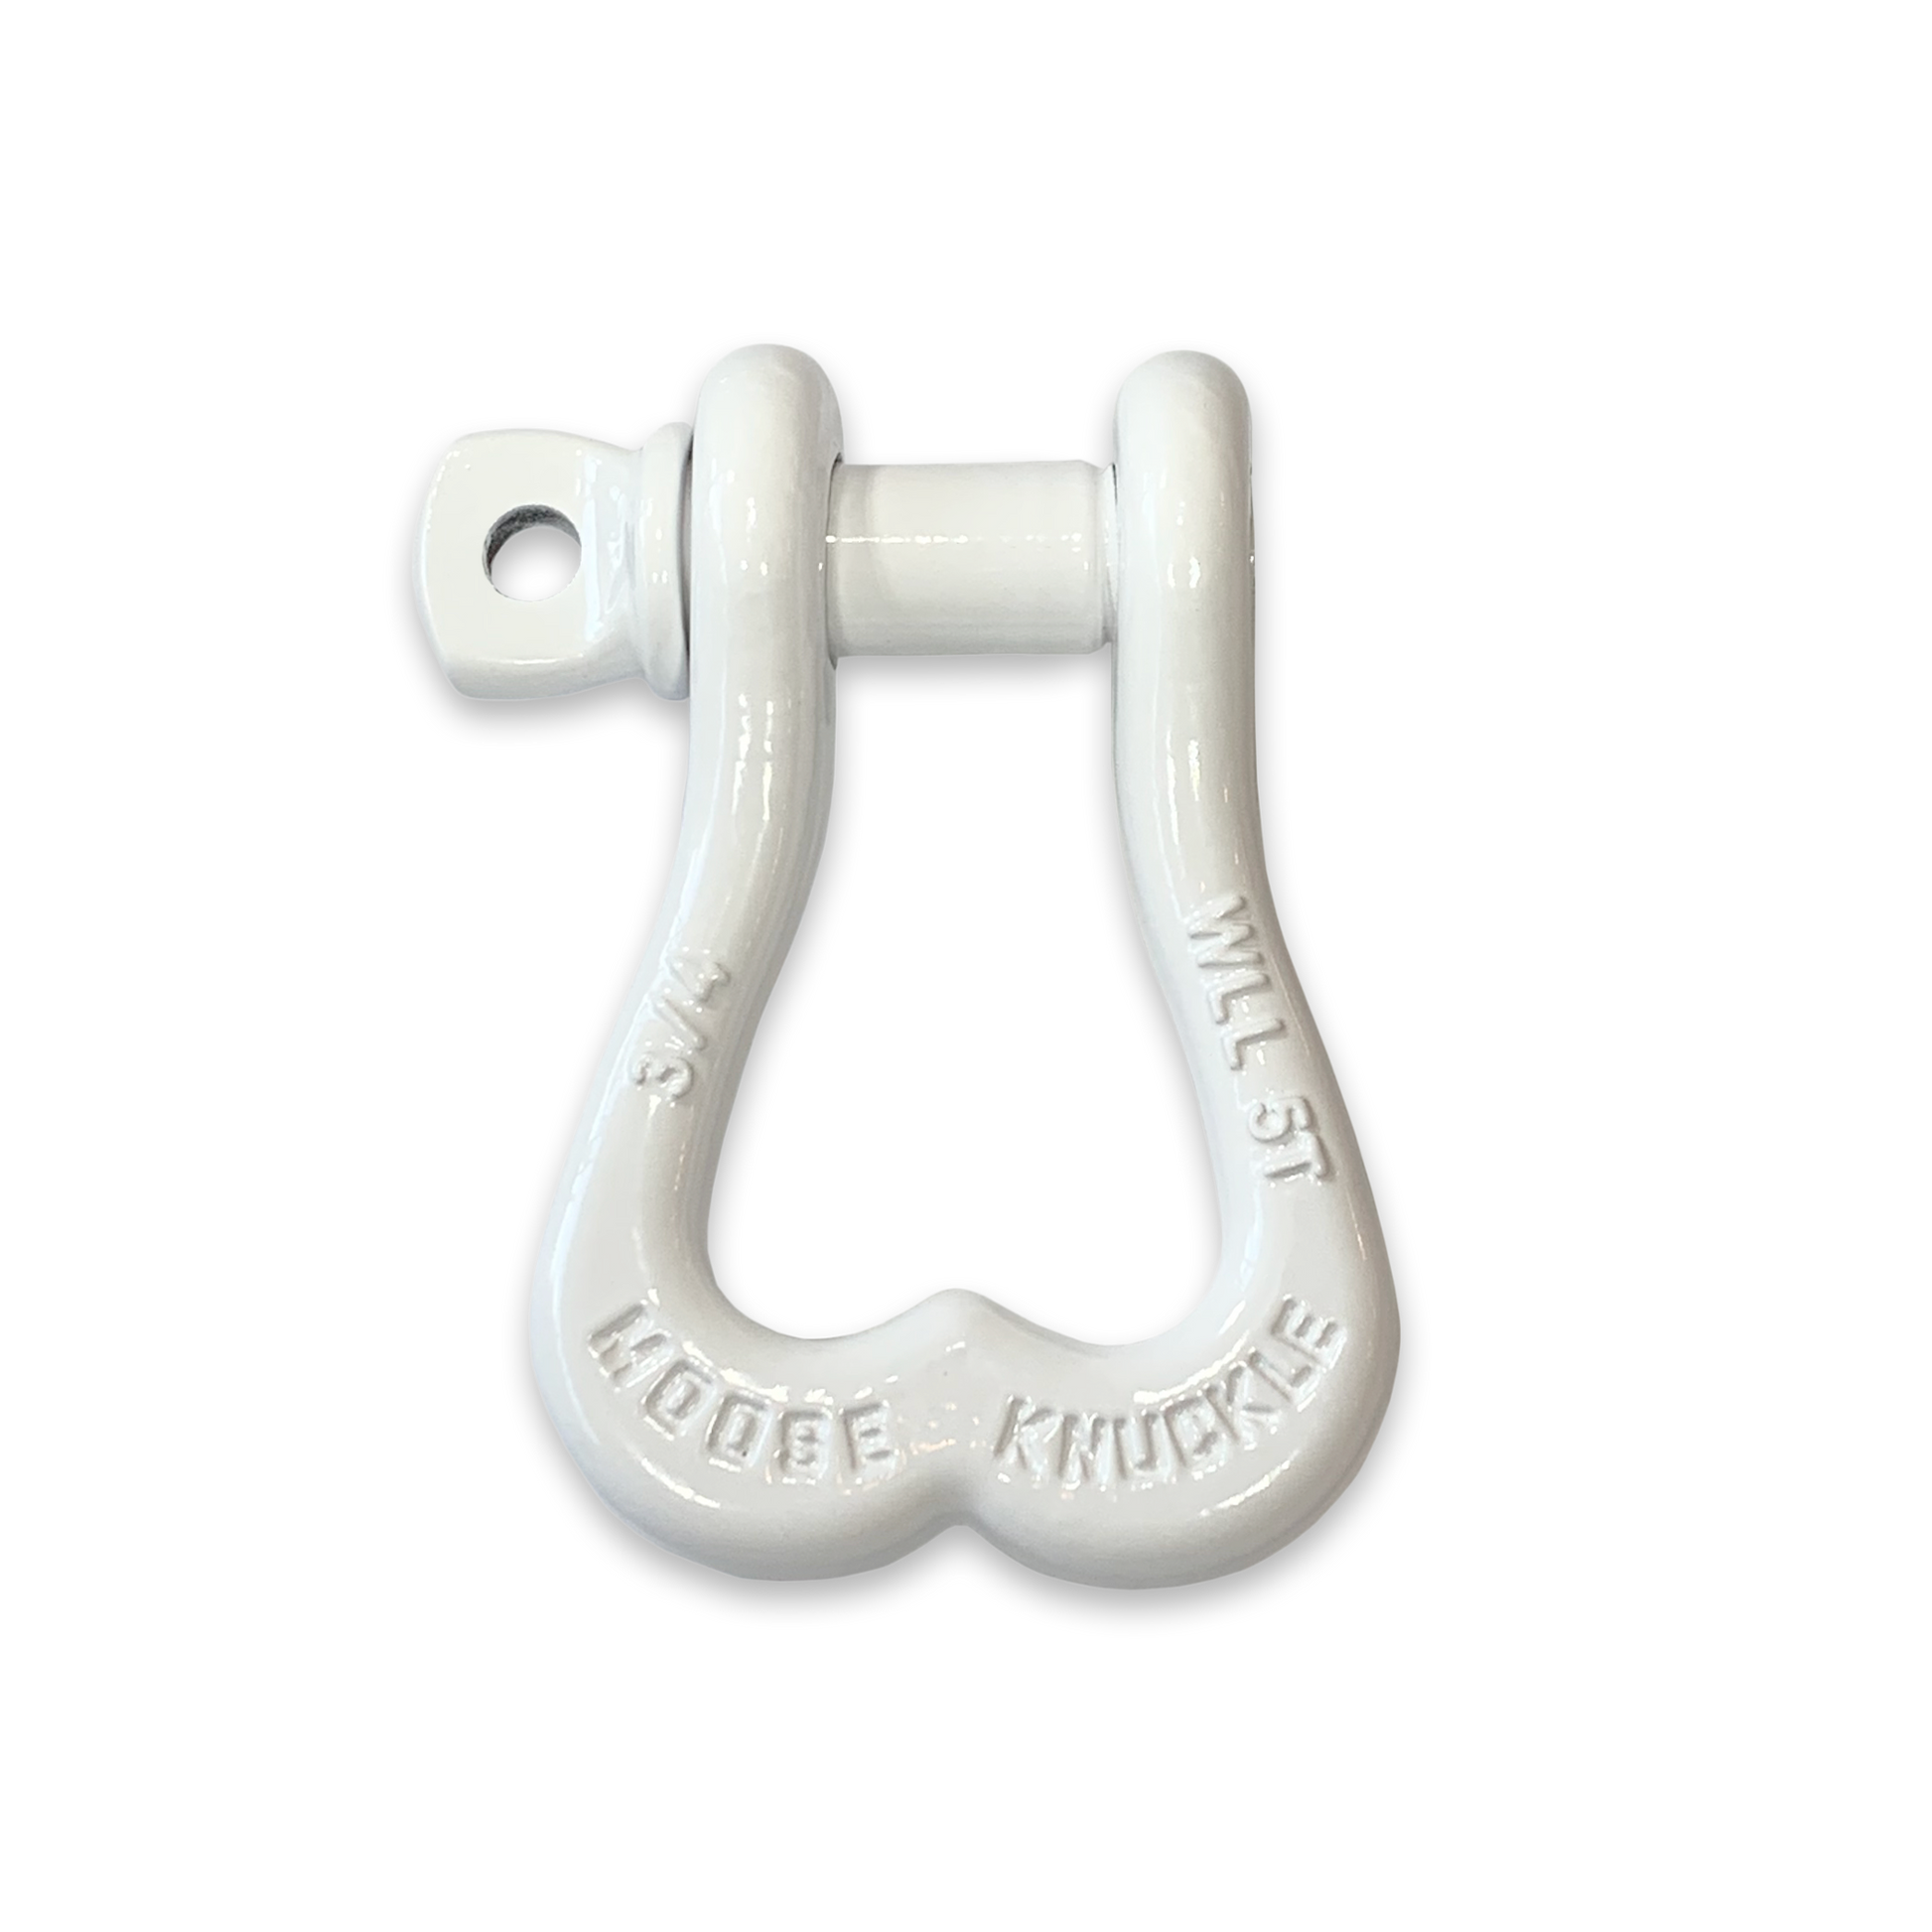 Moose Knuckle XL Pure White D-Ring 3/4" Shackle for Towing Off-Road Jeep, Tacoma, 4-Runner, 4x4 Truck and SxS Vehicle Recovery